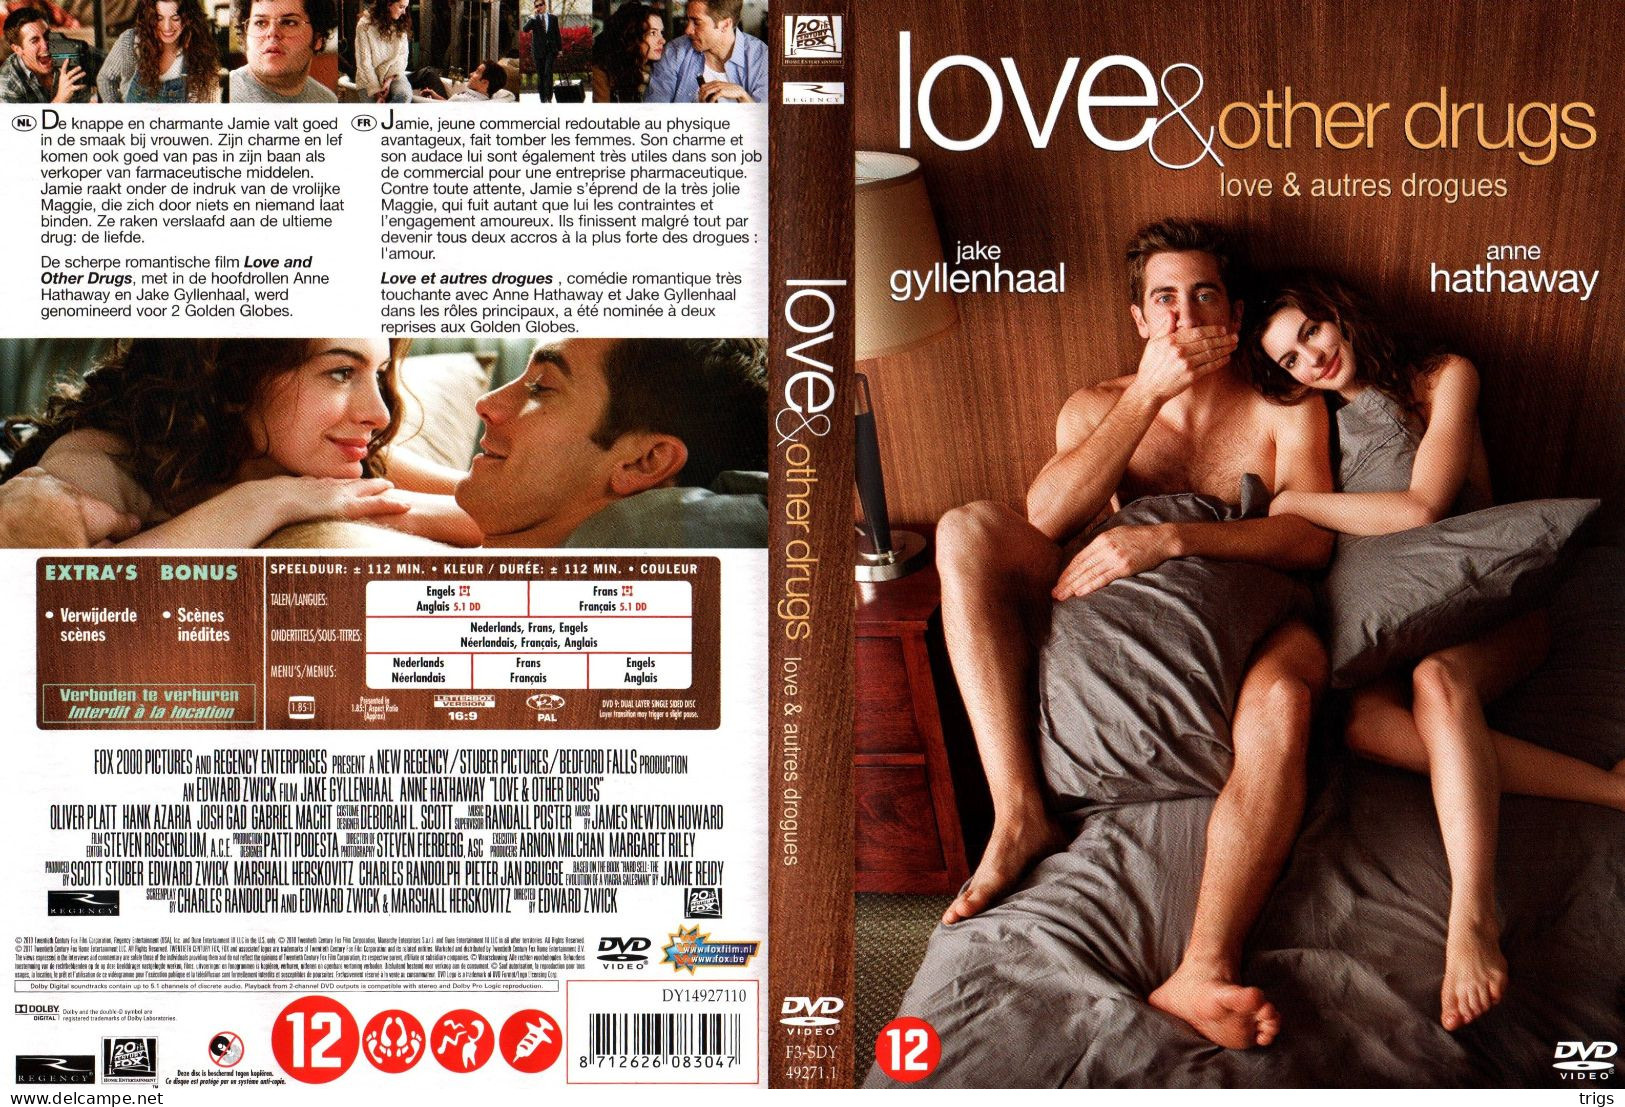 DVD - Love & Other Drugs - Commedia